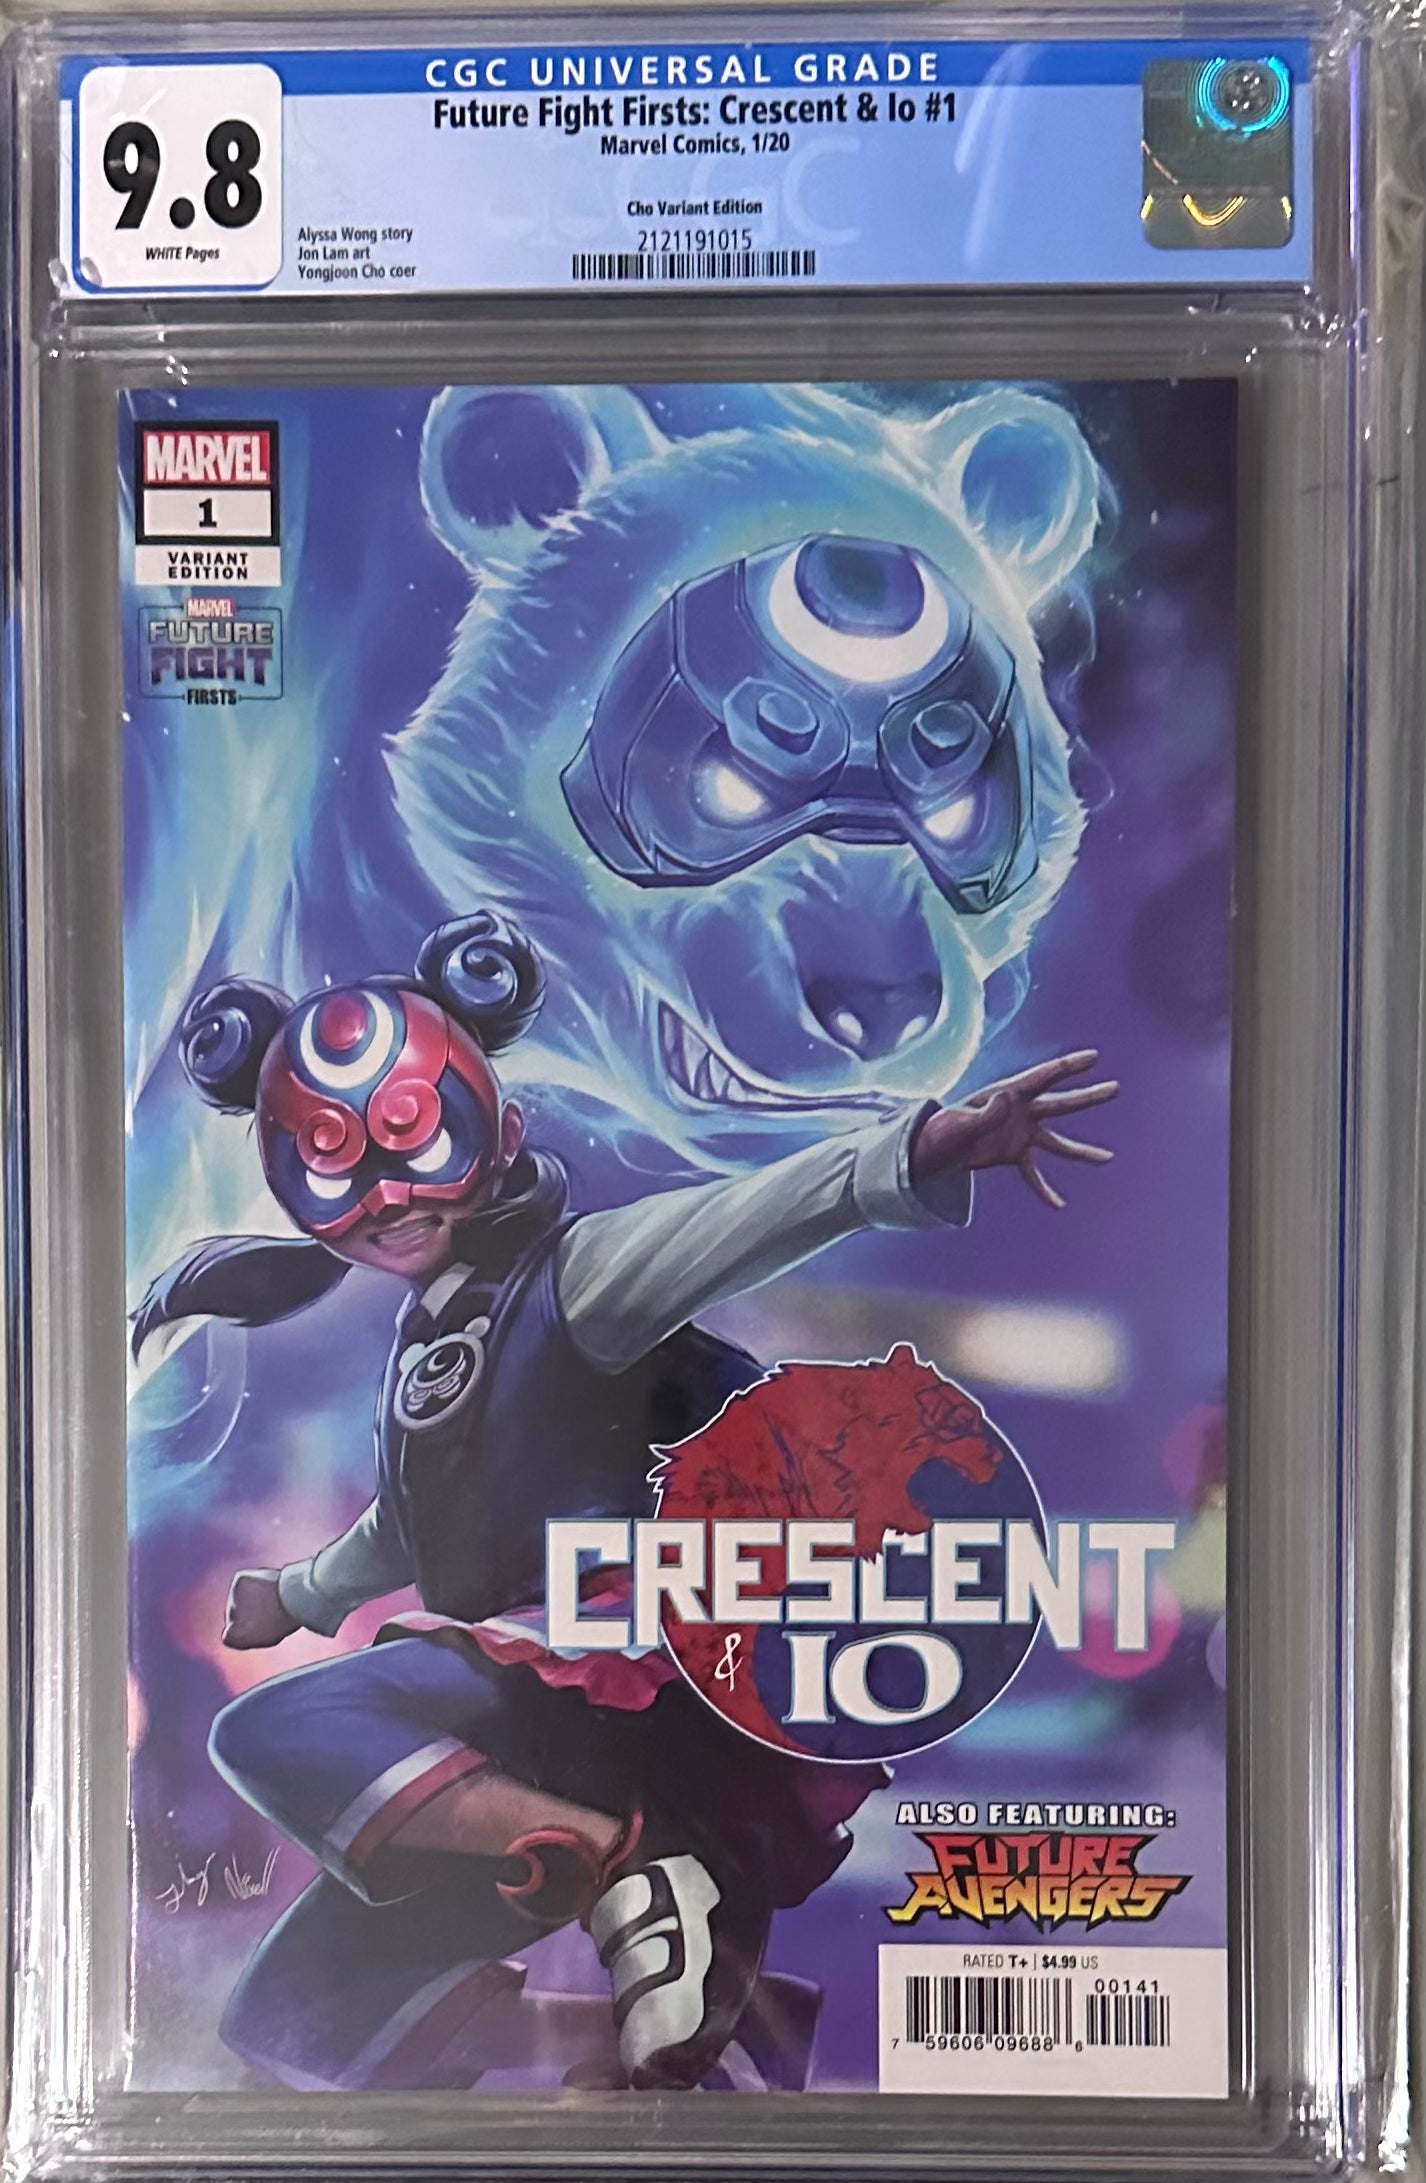 Future Fight Firsts: Crescent & Io 1 Cho Variant Edition CGC 9.8 2020